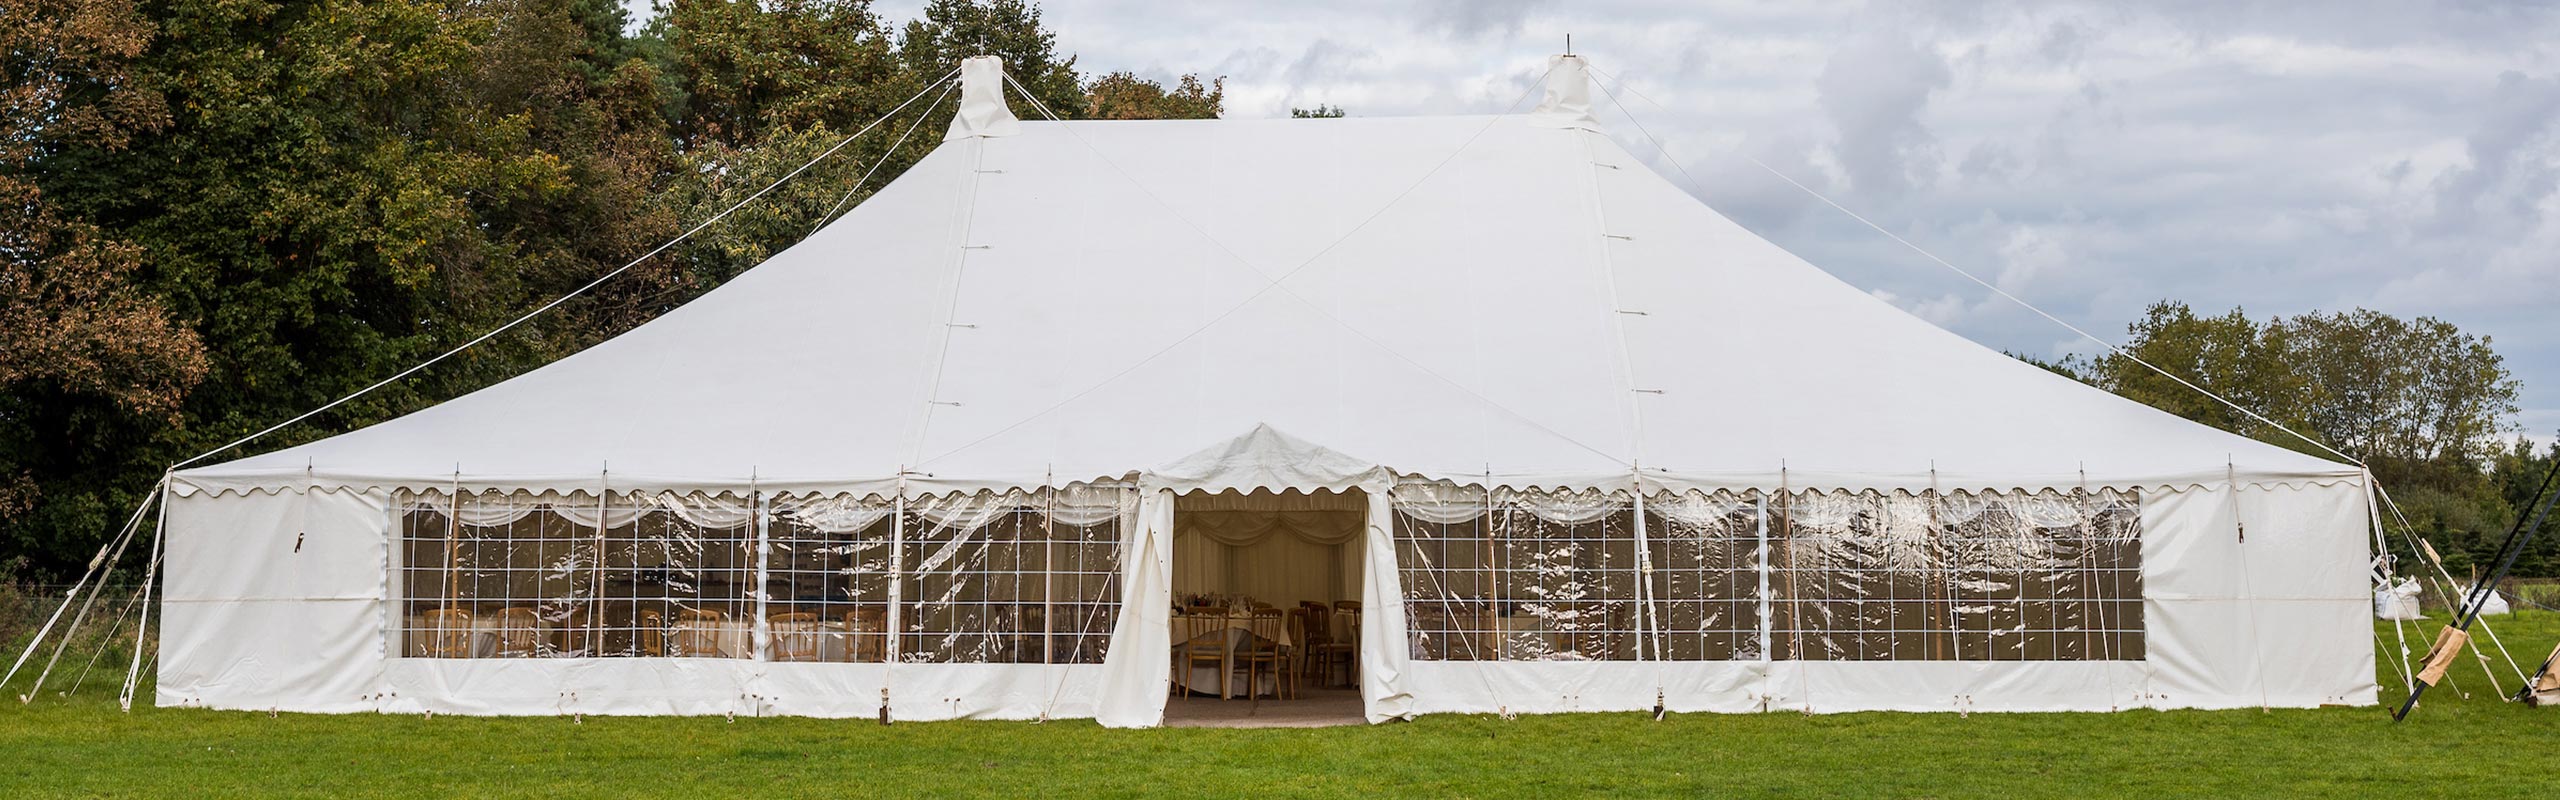 Marquees hire Suffolk